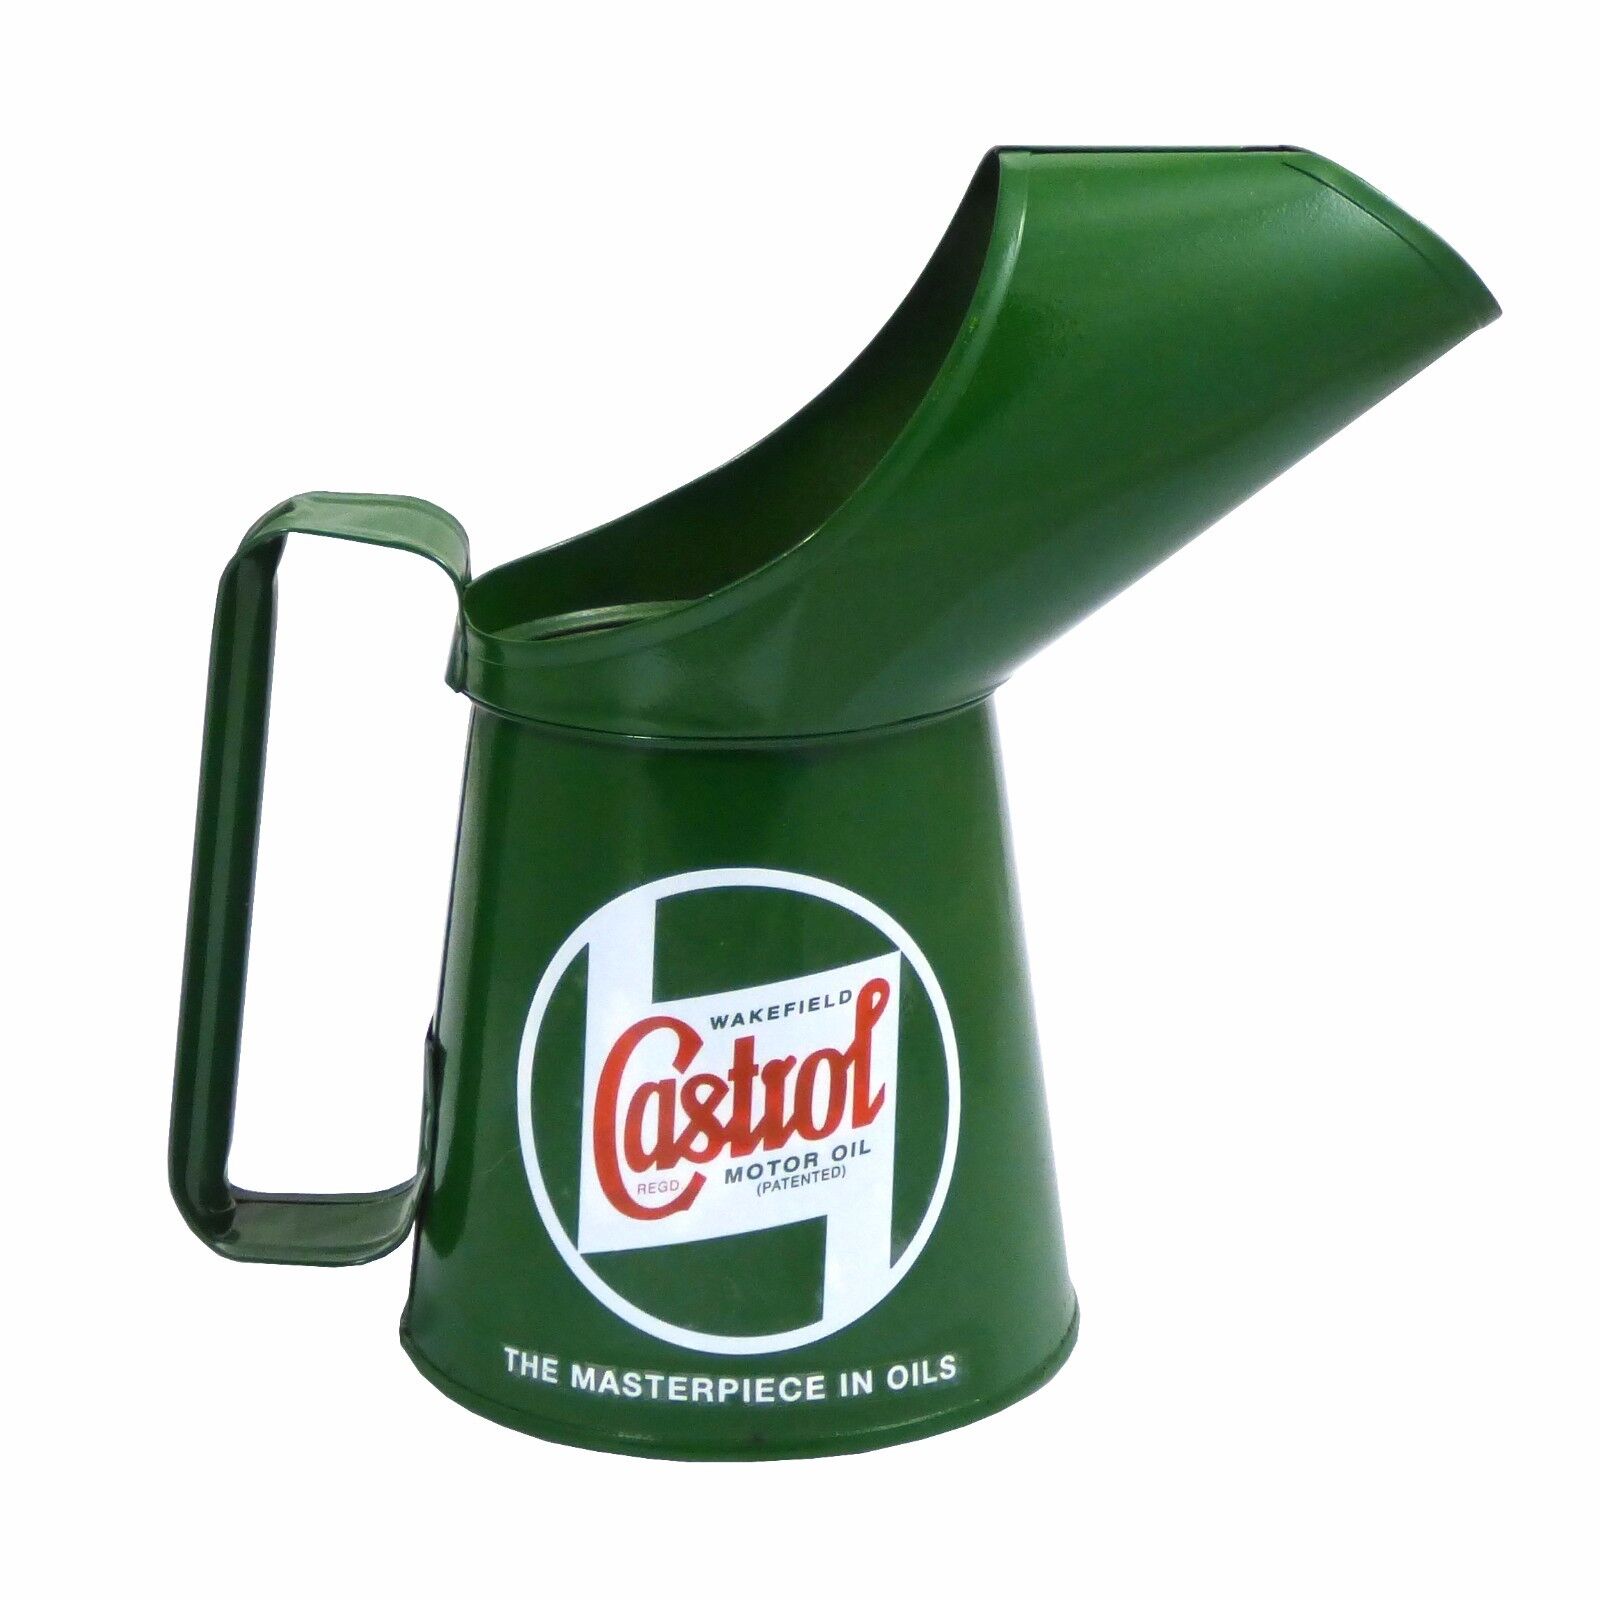 Classic Vintage Genuine Castrol Oil Pouring Pint Can in Green